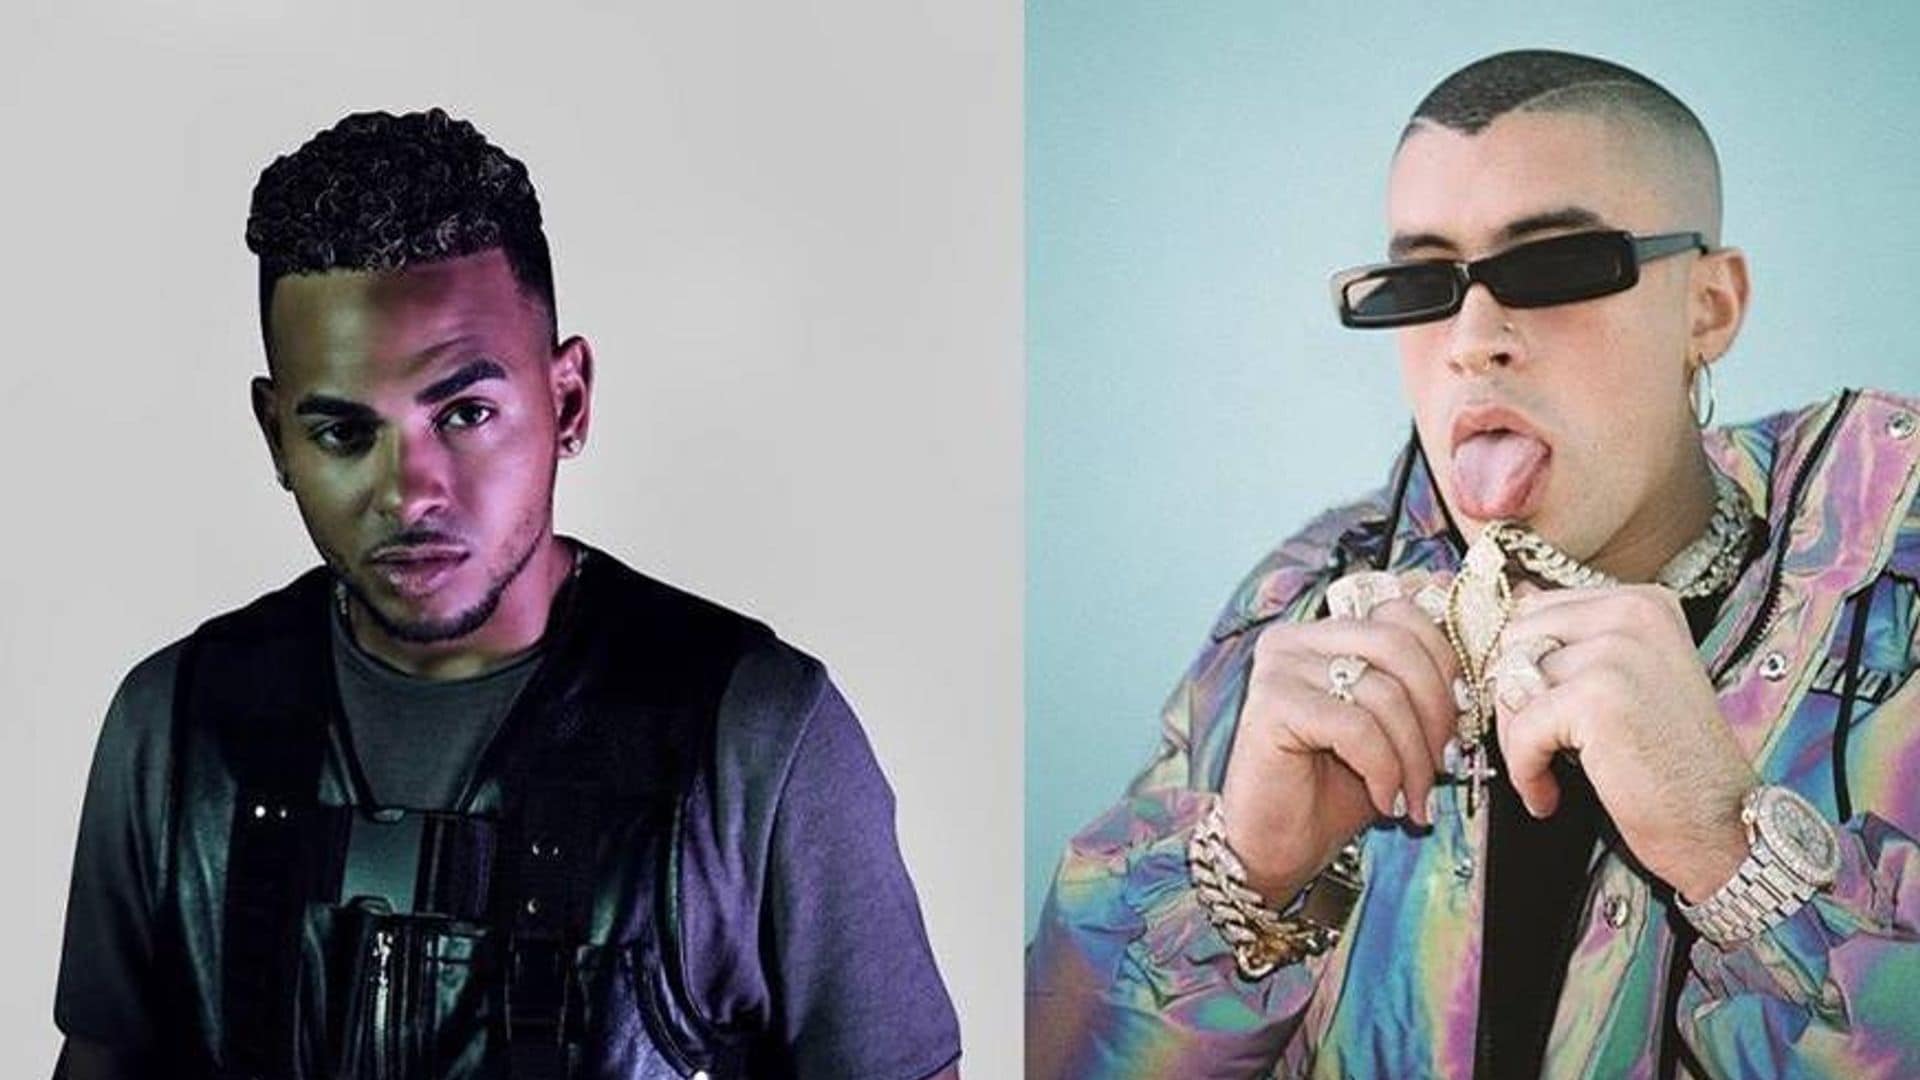 Ozuna and Bad Bunny lead the list of nominees at the 2020 Billboard Latin Music Awards